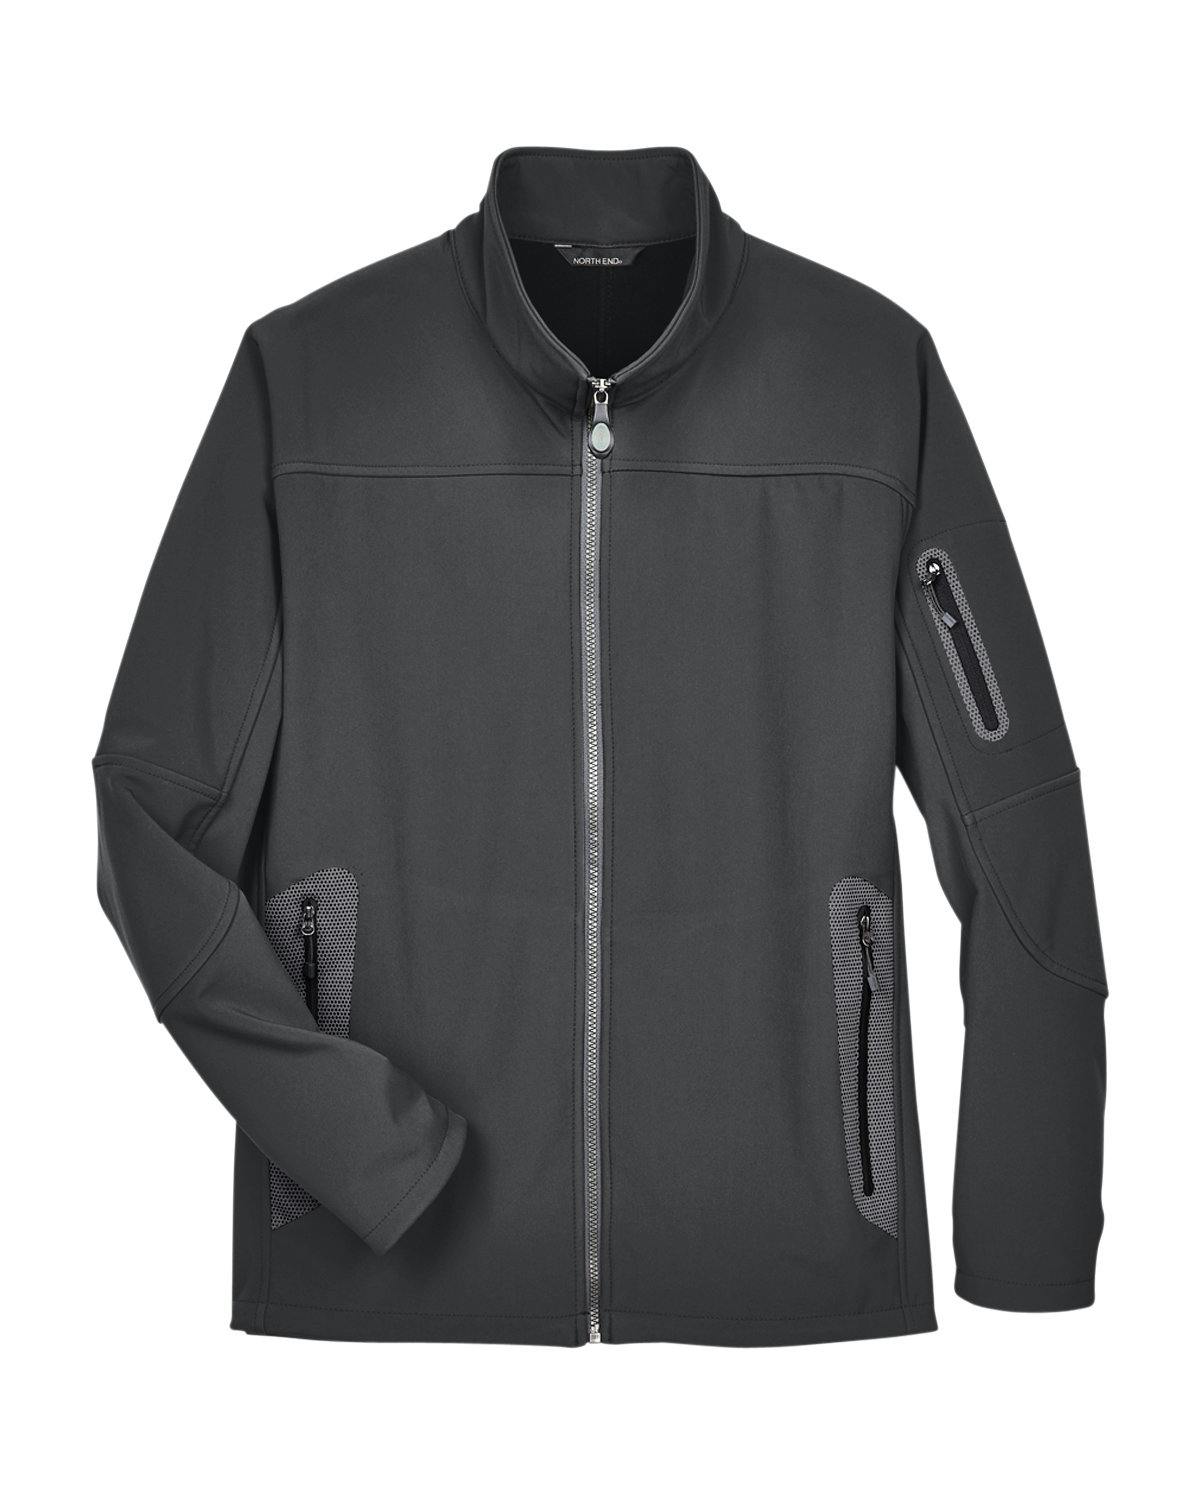 Image for Men's Three-Layer Fleece Bonded Soft Shell Technical Jacket